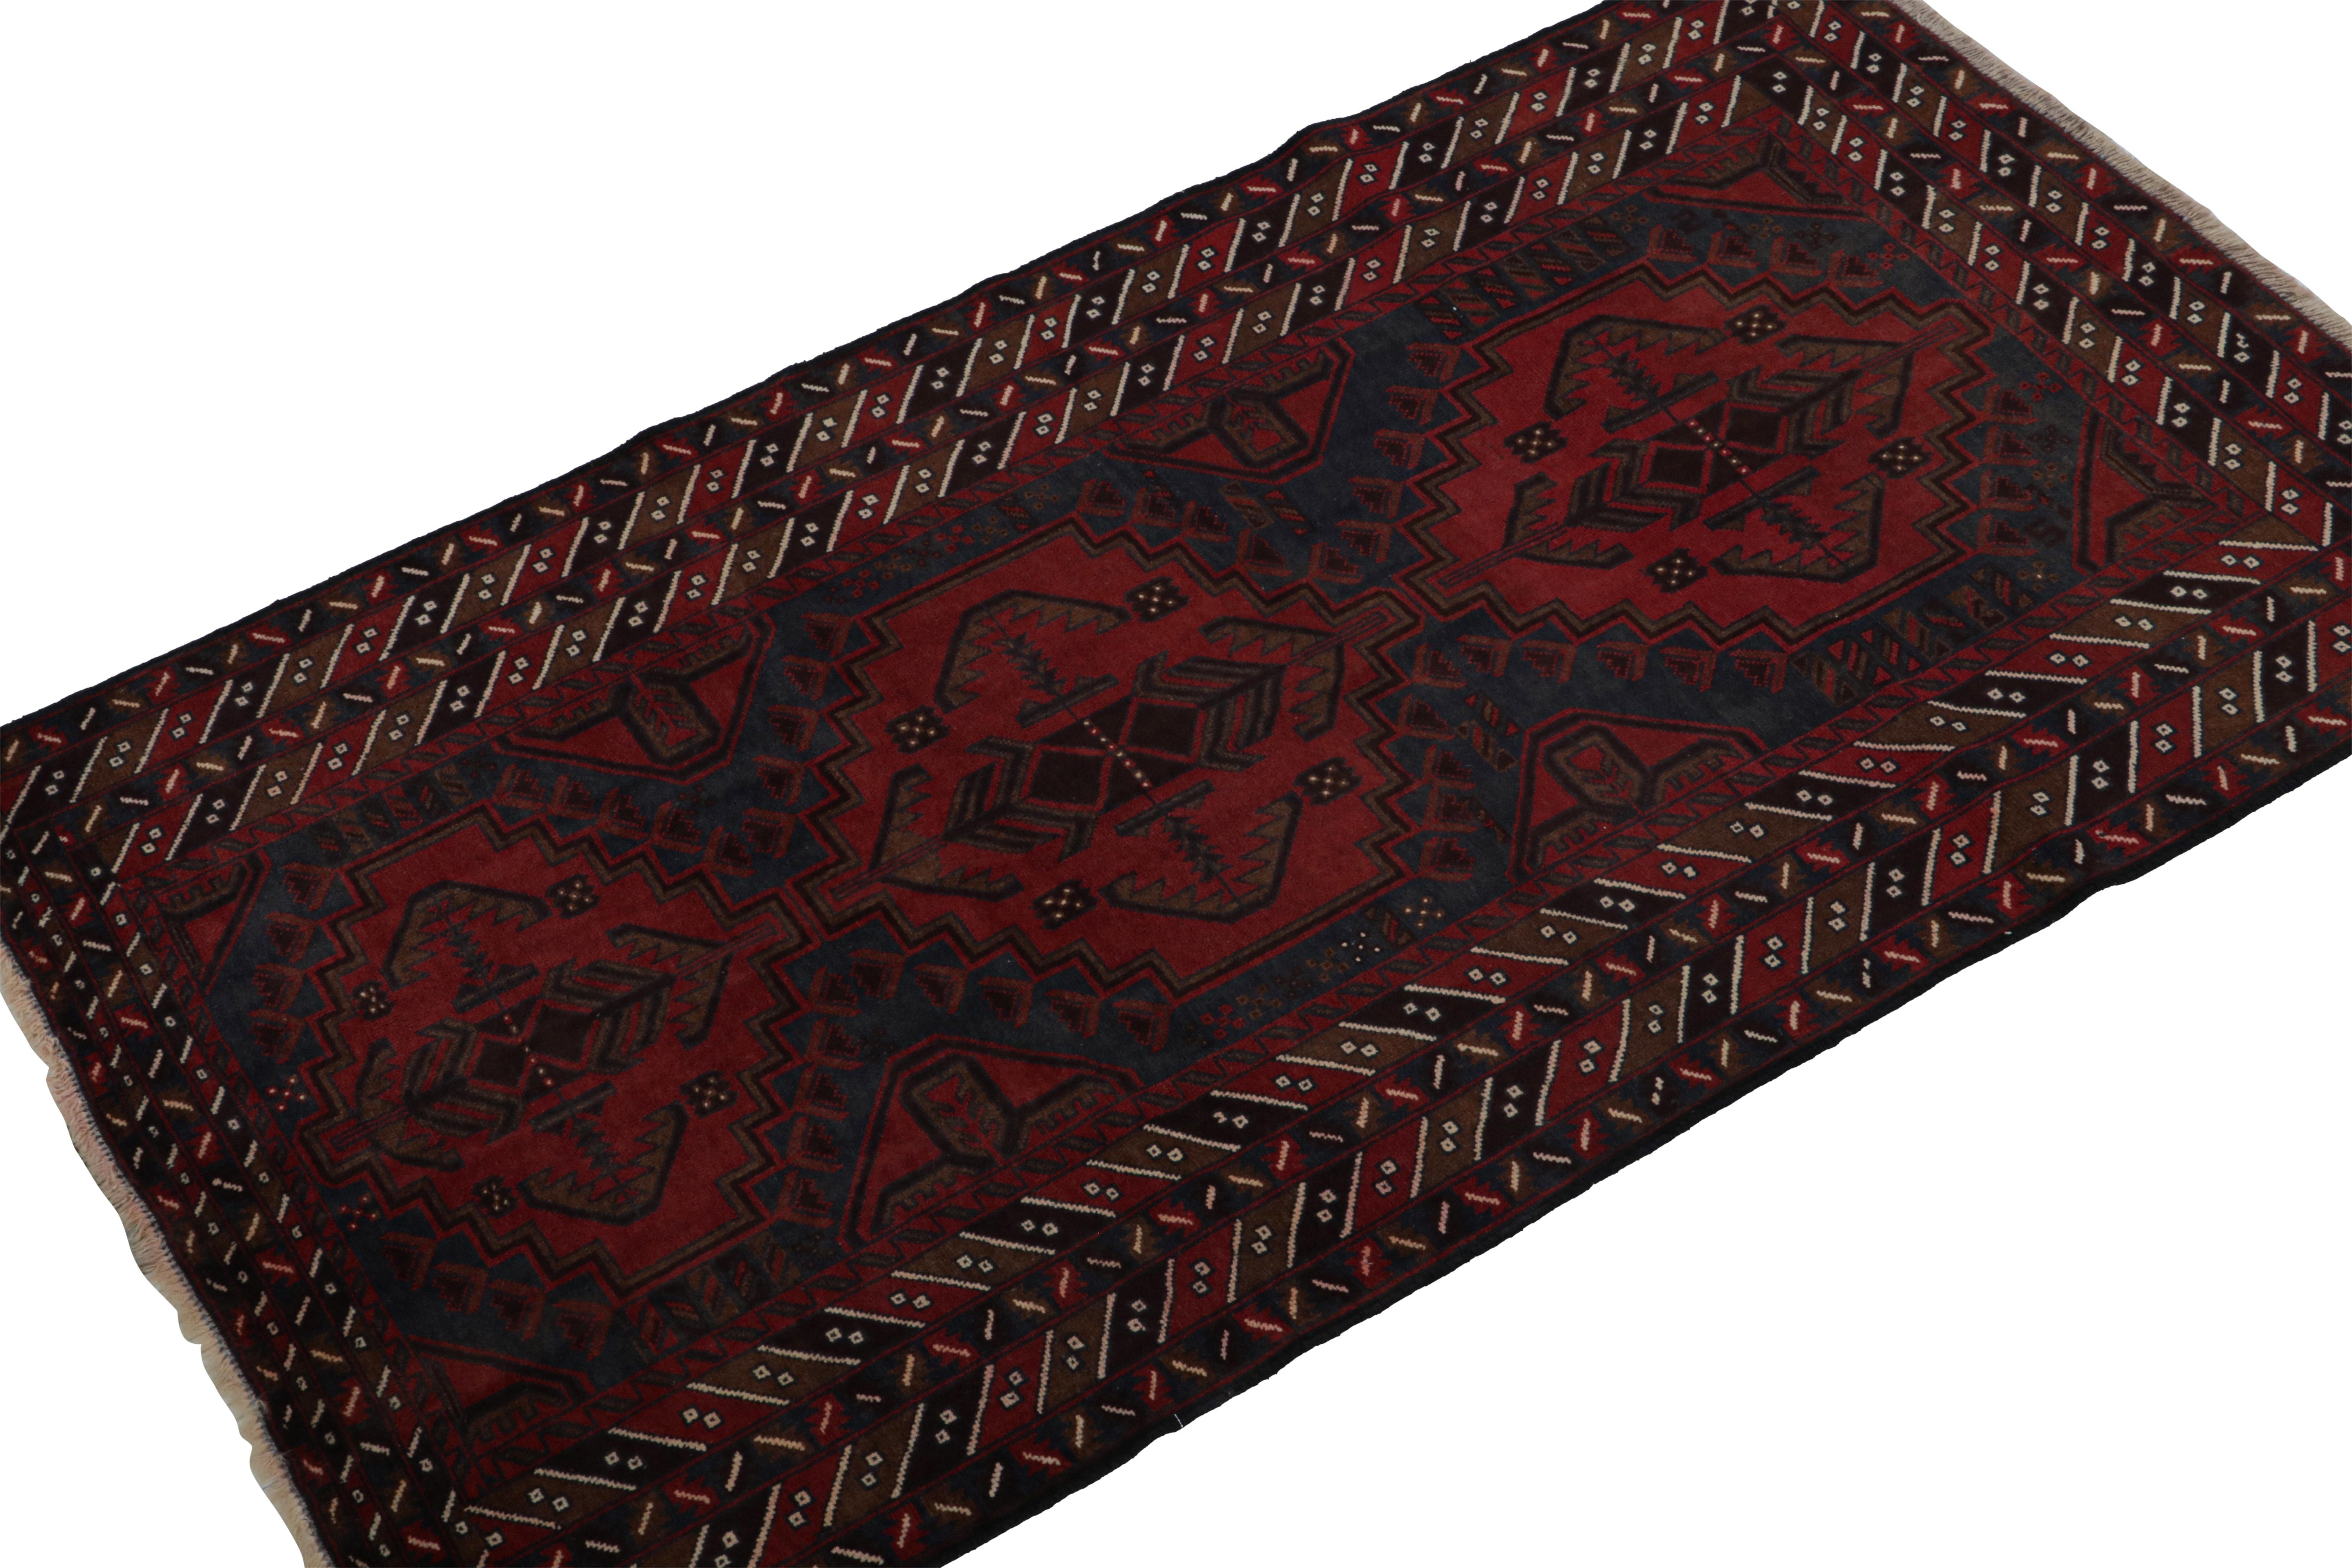 Hand-knotted in wool & goat hair, this vintage tribal rug of the 1950s is a coveted addition to Rug & Kilim’s Antique & Vintage collection. 

On the Design: 

Coming from the Baluch tribe, this 4x6 rug boasts patterns in rich tones of red, blue &